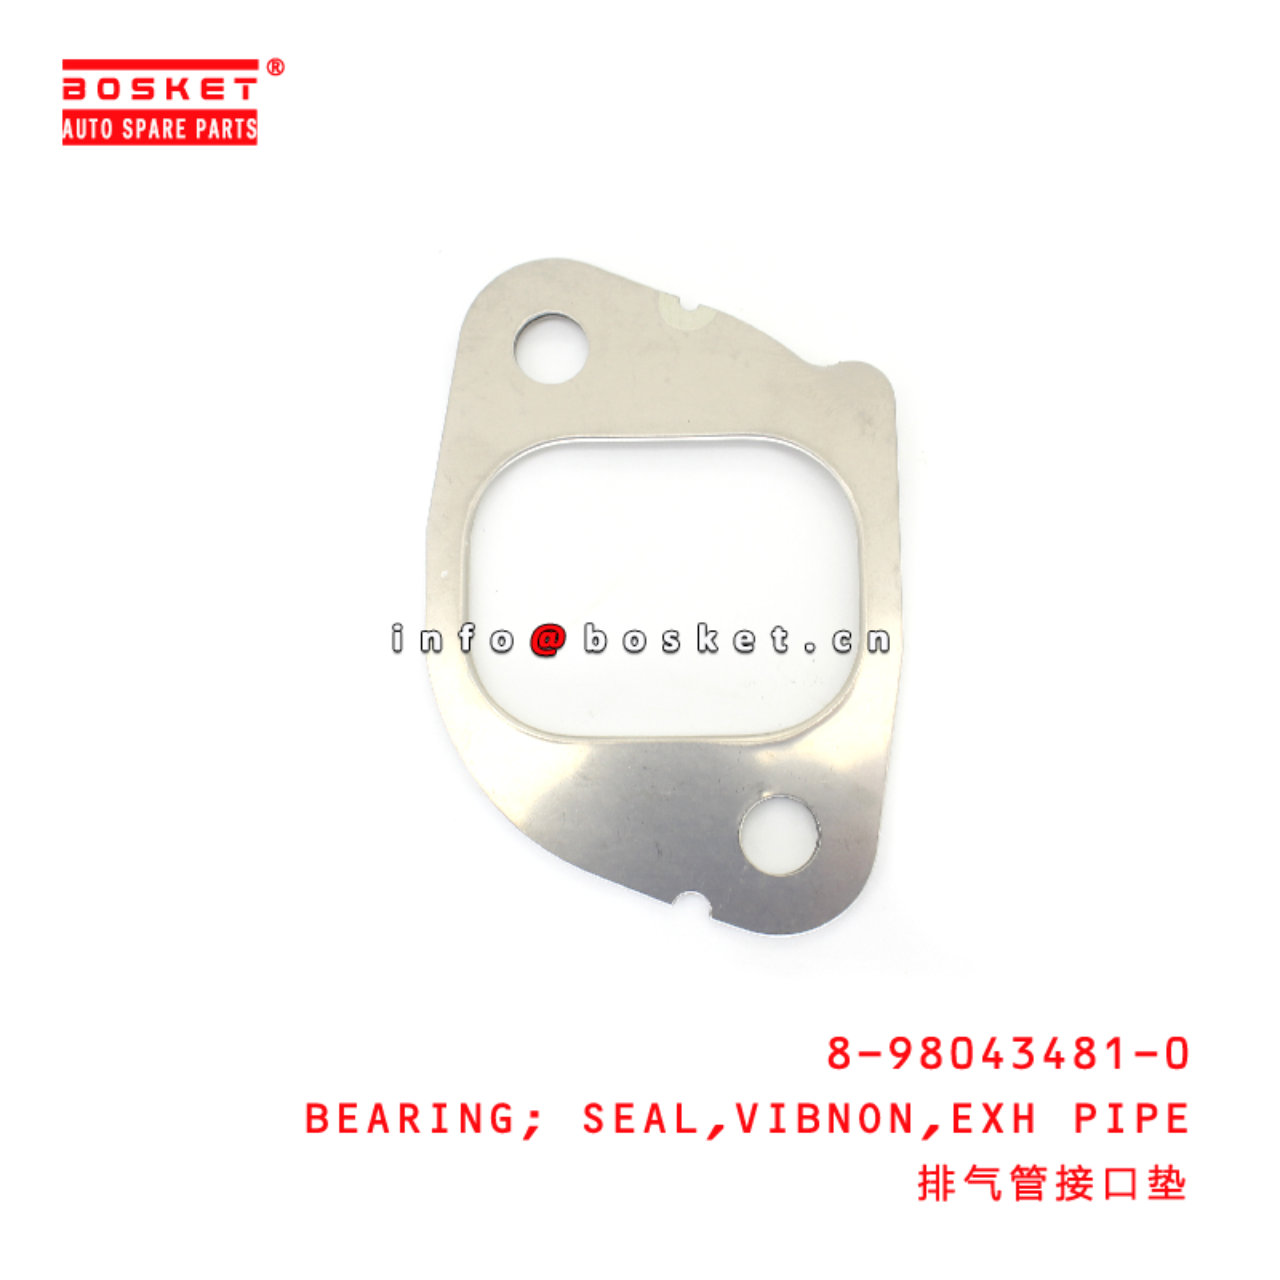 8-98043481-0 Exhaust Pipe Vibnon Seal Bearing suitable for ISUZU  6HK1 8980434810